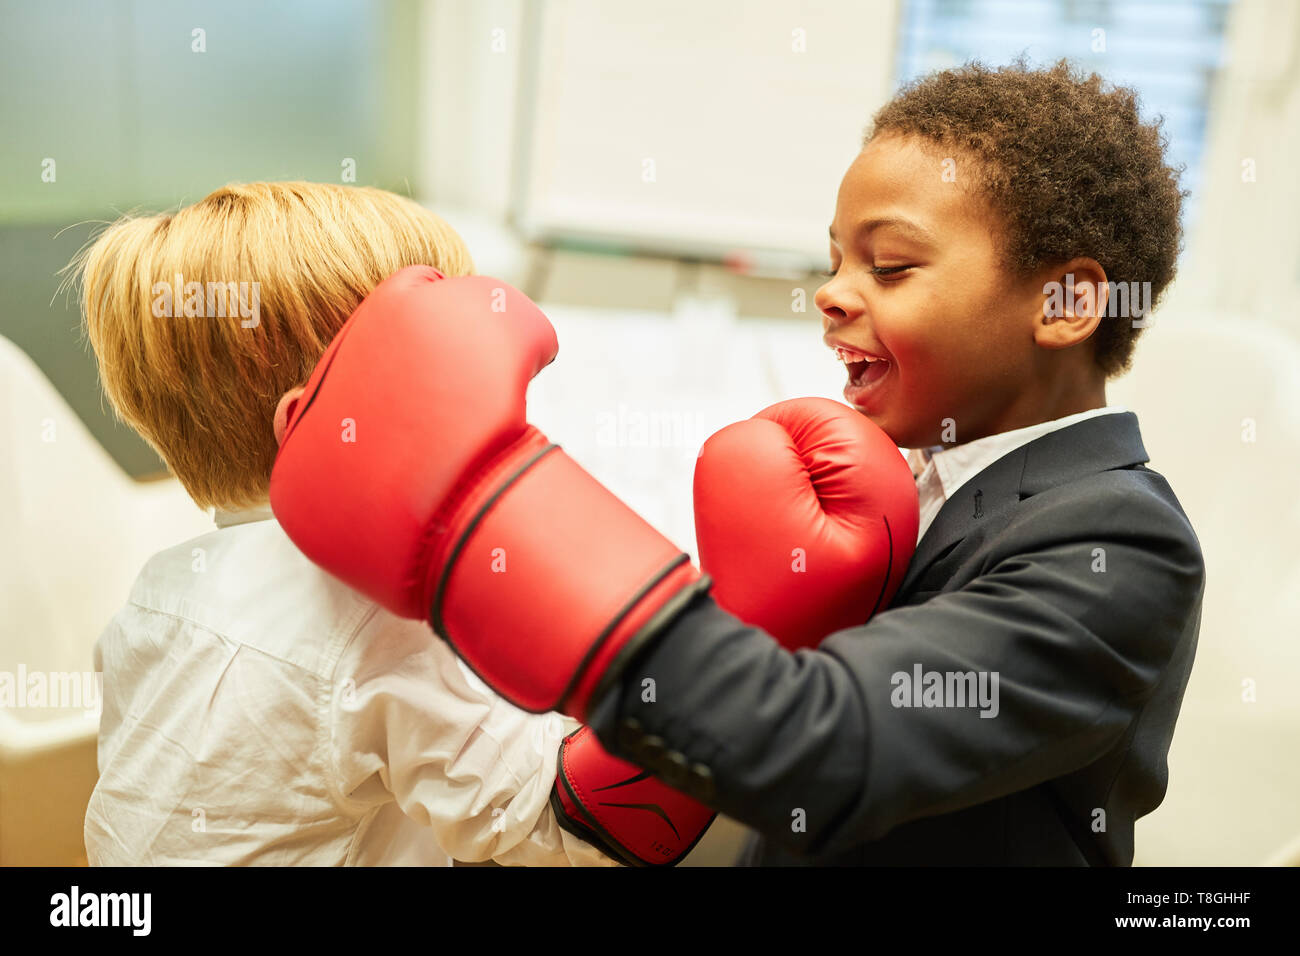 Business children in a boxing match as a role-playing game or training to reduce stress Stock Photo